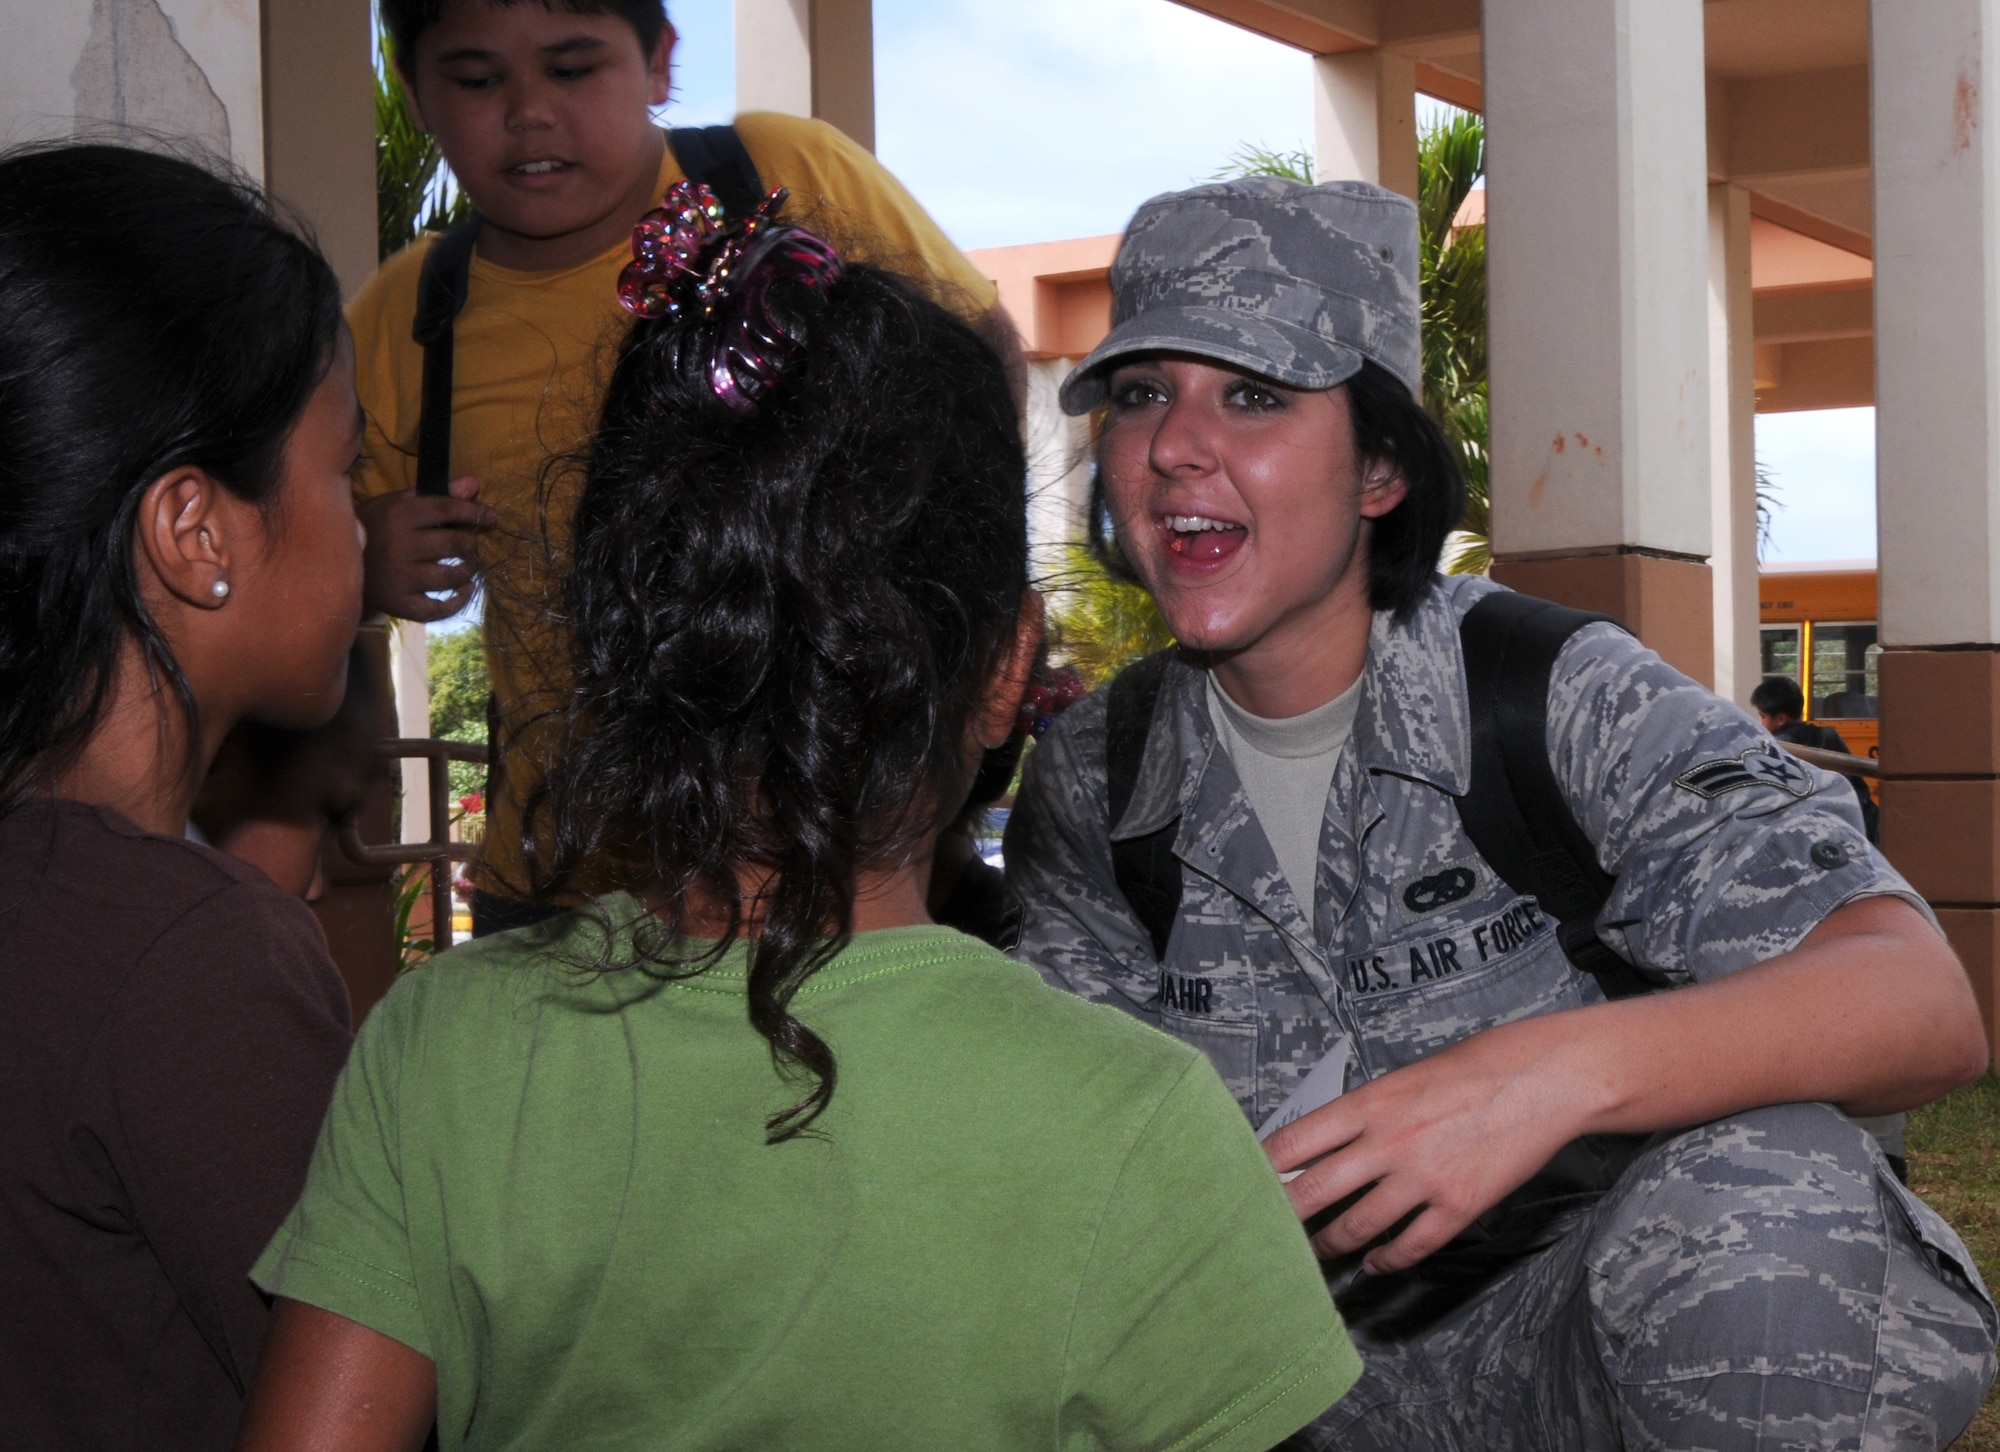 Airman 1st Class Shanell Gutjahr,  36th Expeditionary Aircraft Maintenance Squadron weapon loader, greets children at Machananao Elementary School March 13, 2009.Airmen from the 36th Expeditionary Aircraft Maintenance Unit, deployed here from Elmendorf Air Force Base, Alaska, have been spending their time bettering the local community of Guam through various volunteer efforts.
(U.S. Air Force photo by Senior Airman Ryan Whitney)